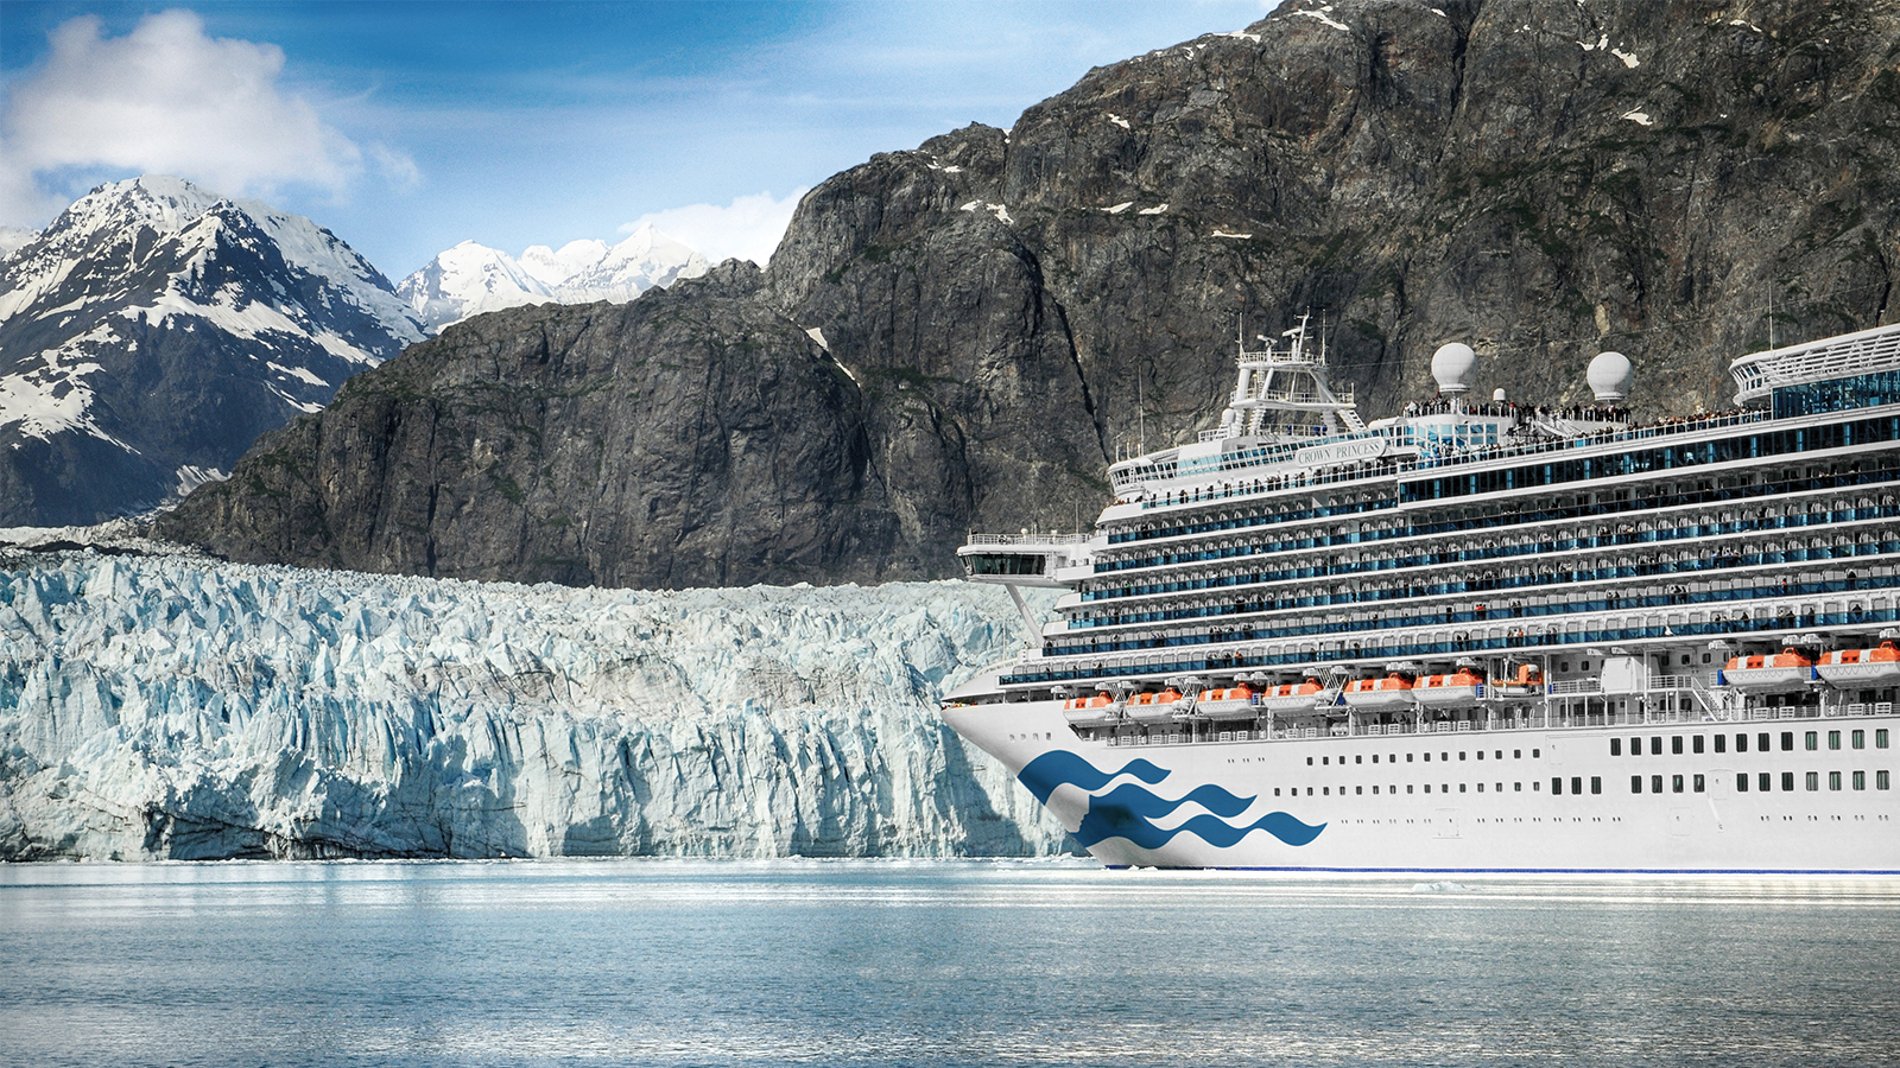 Booking A Cruise Just Got Easier With Princess Cruises’ £1 Deposit